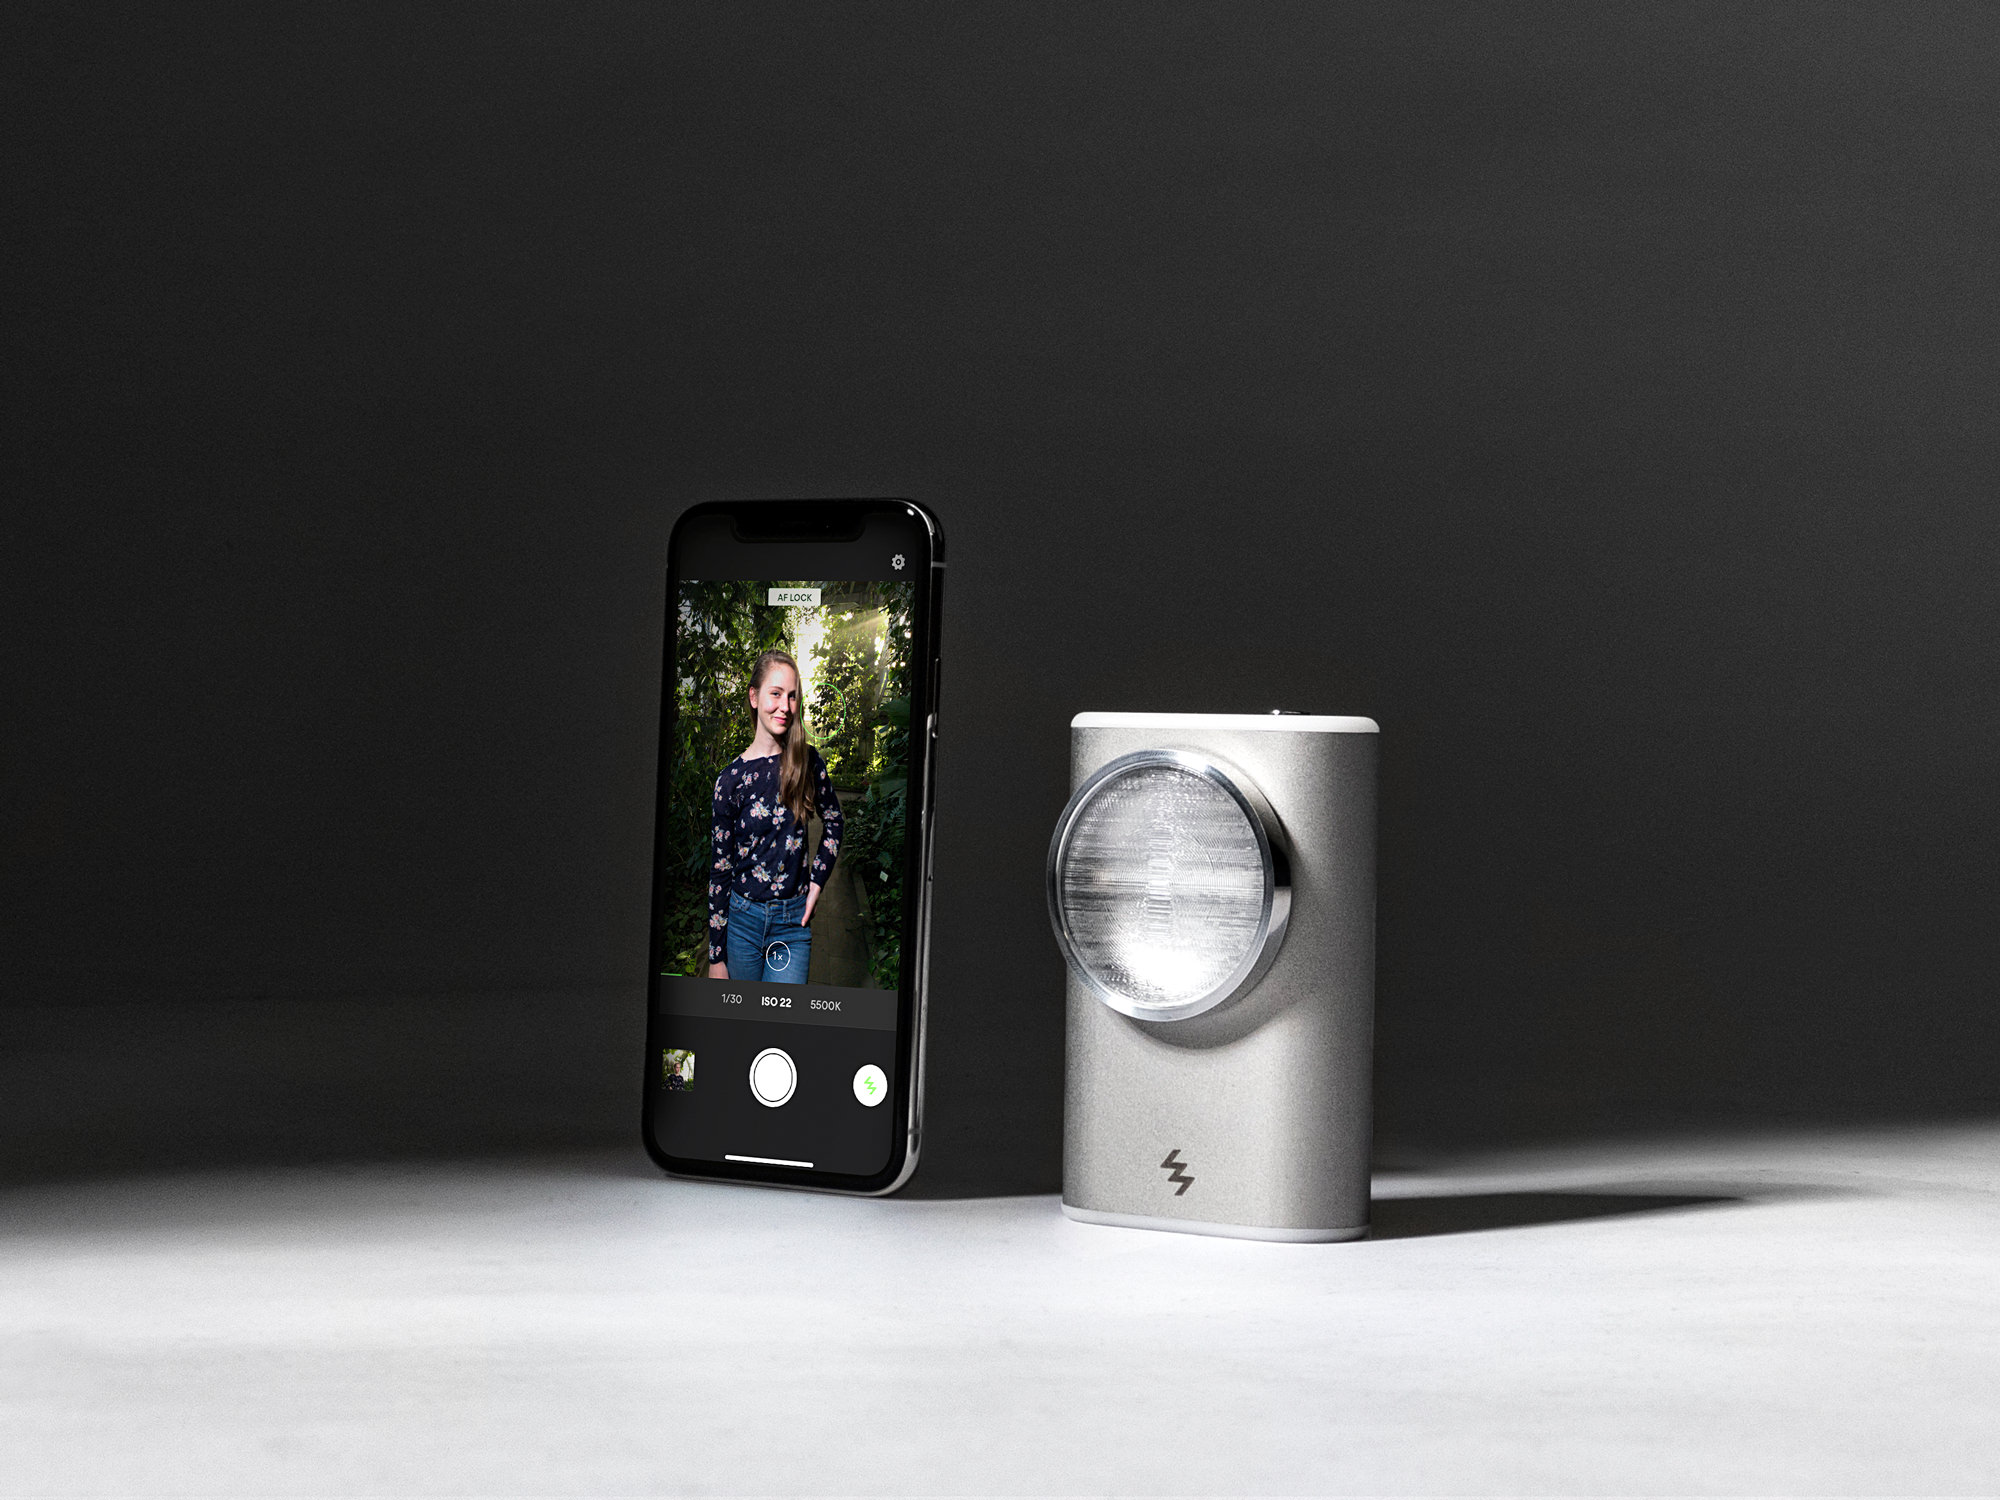 LIT Flash – A New Off-Camera Flash for Smartphone Photographers